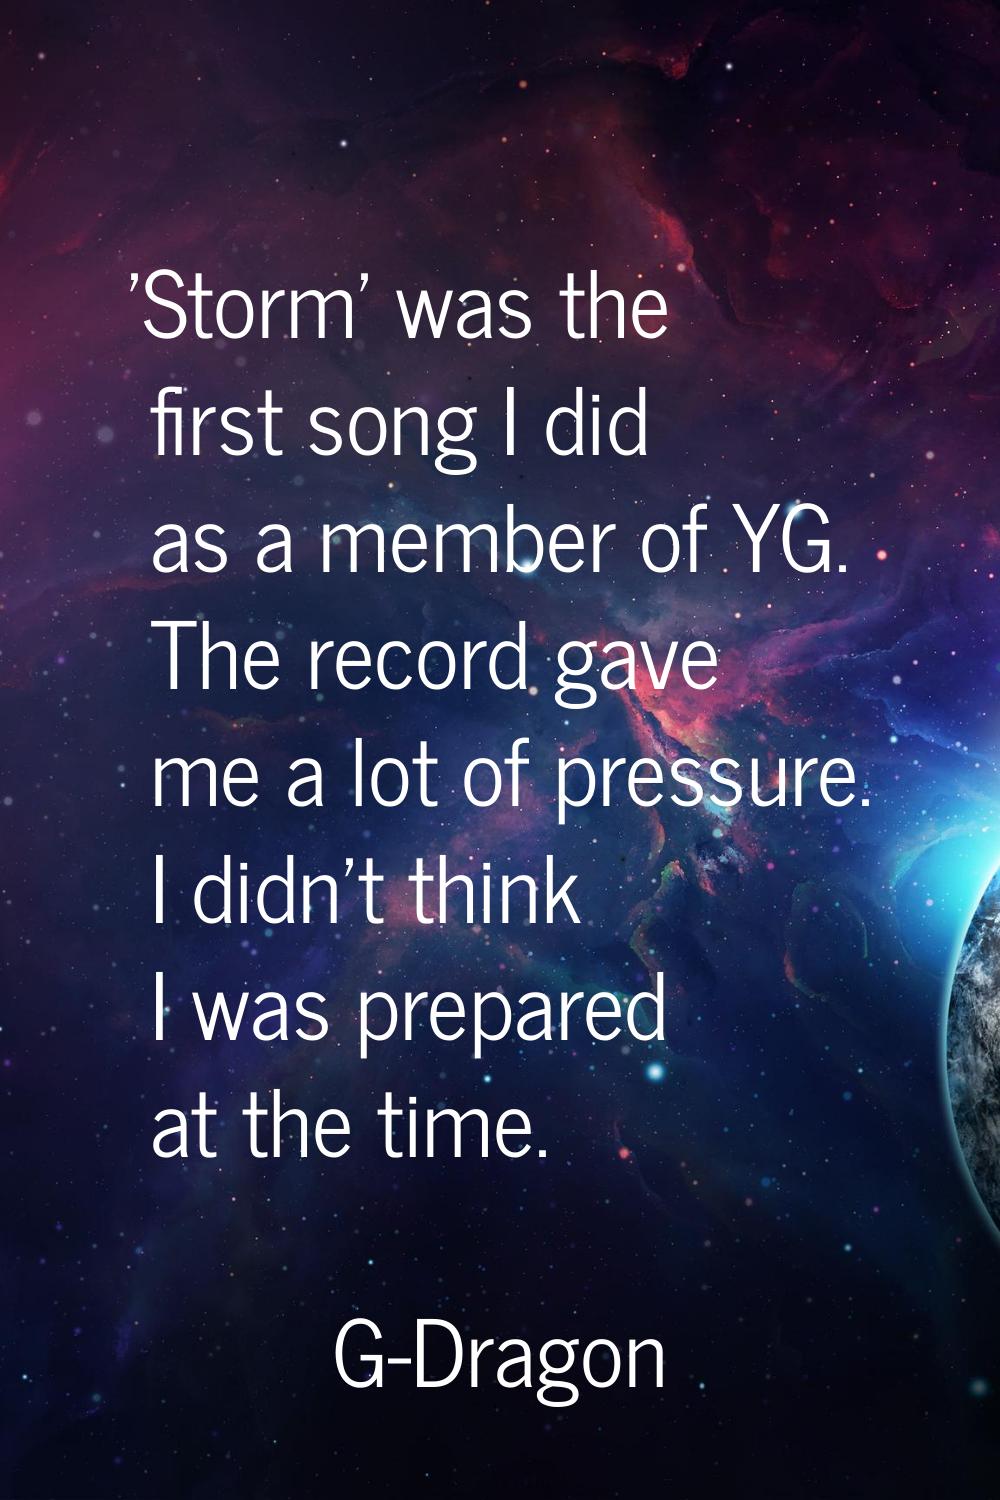 'Storm' was the first song I did as a member of YG. The record gave me a lot of pressure. I didn't 